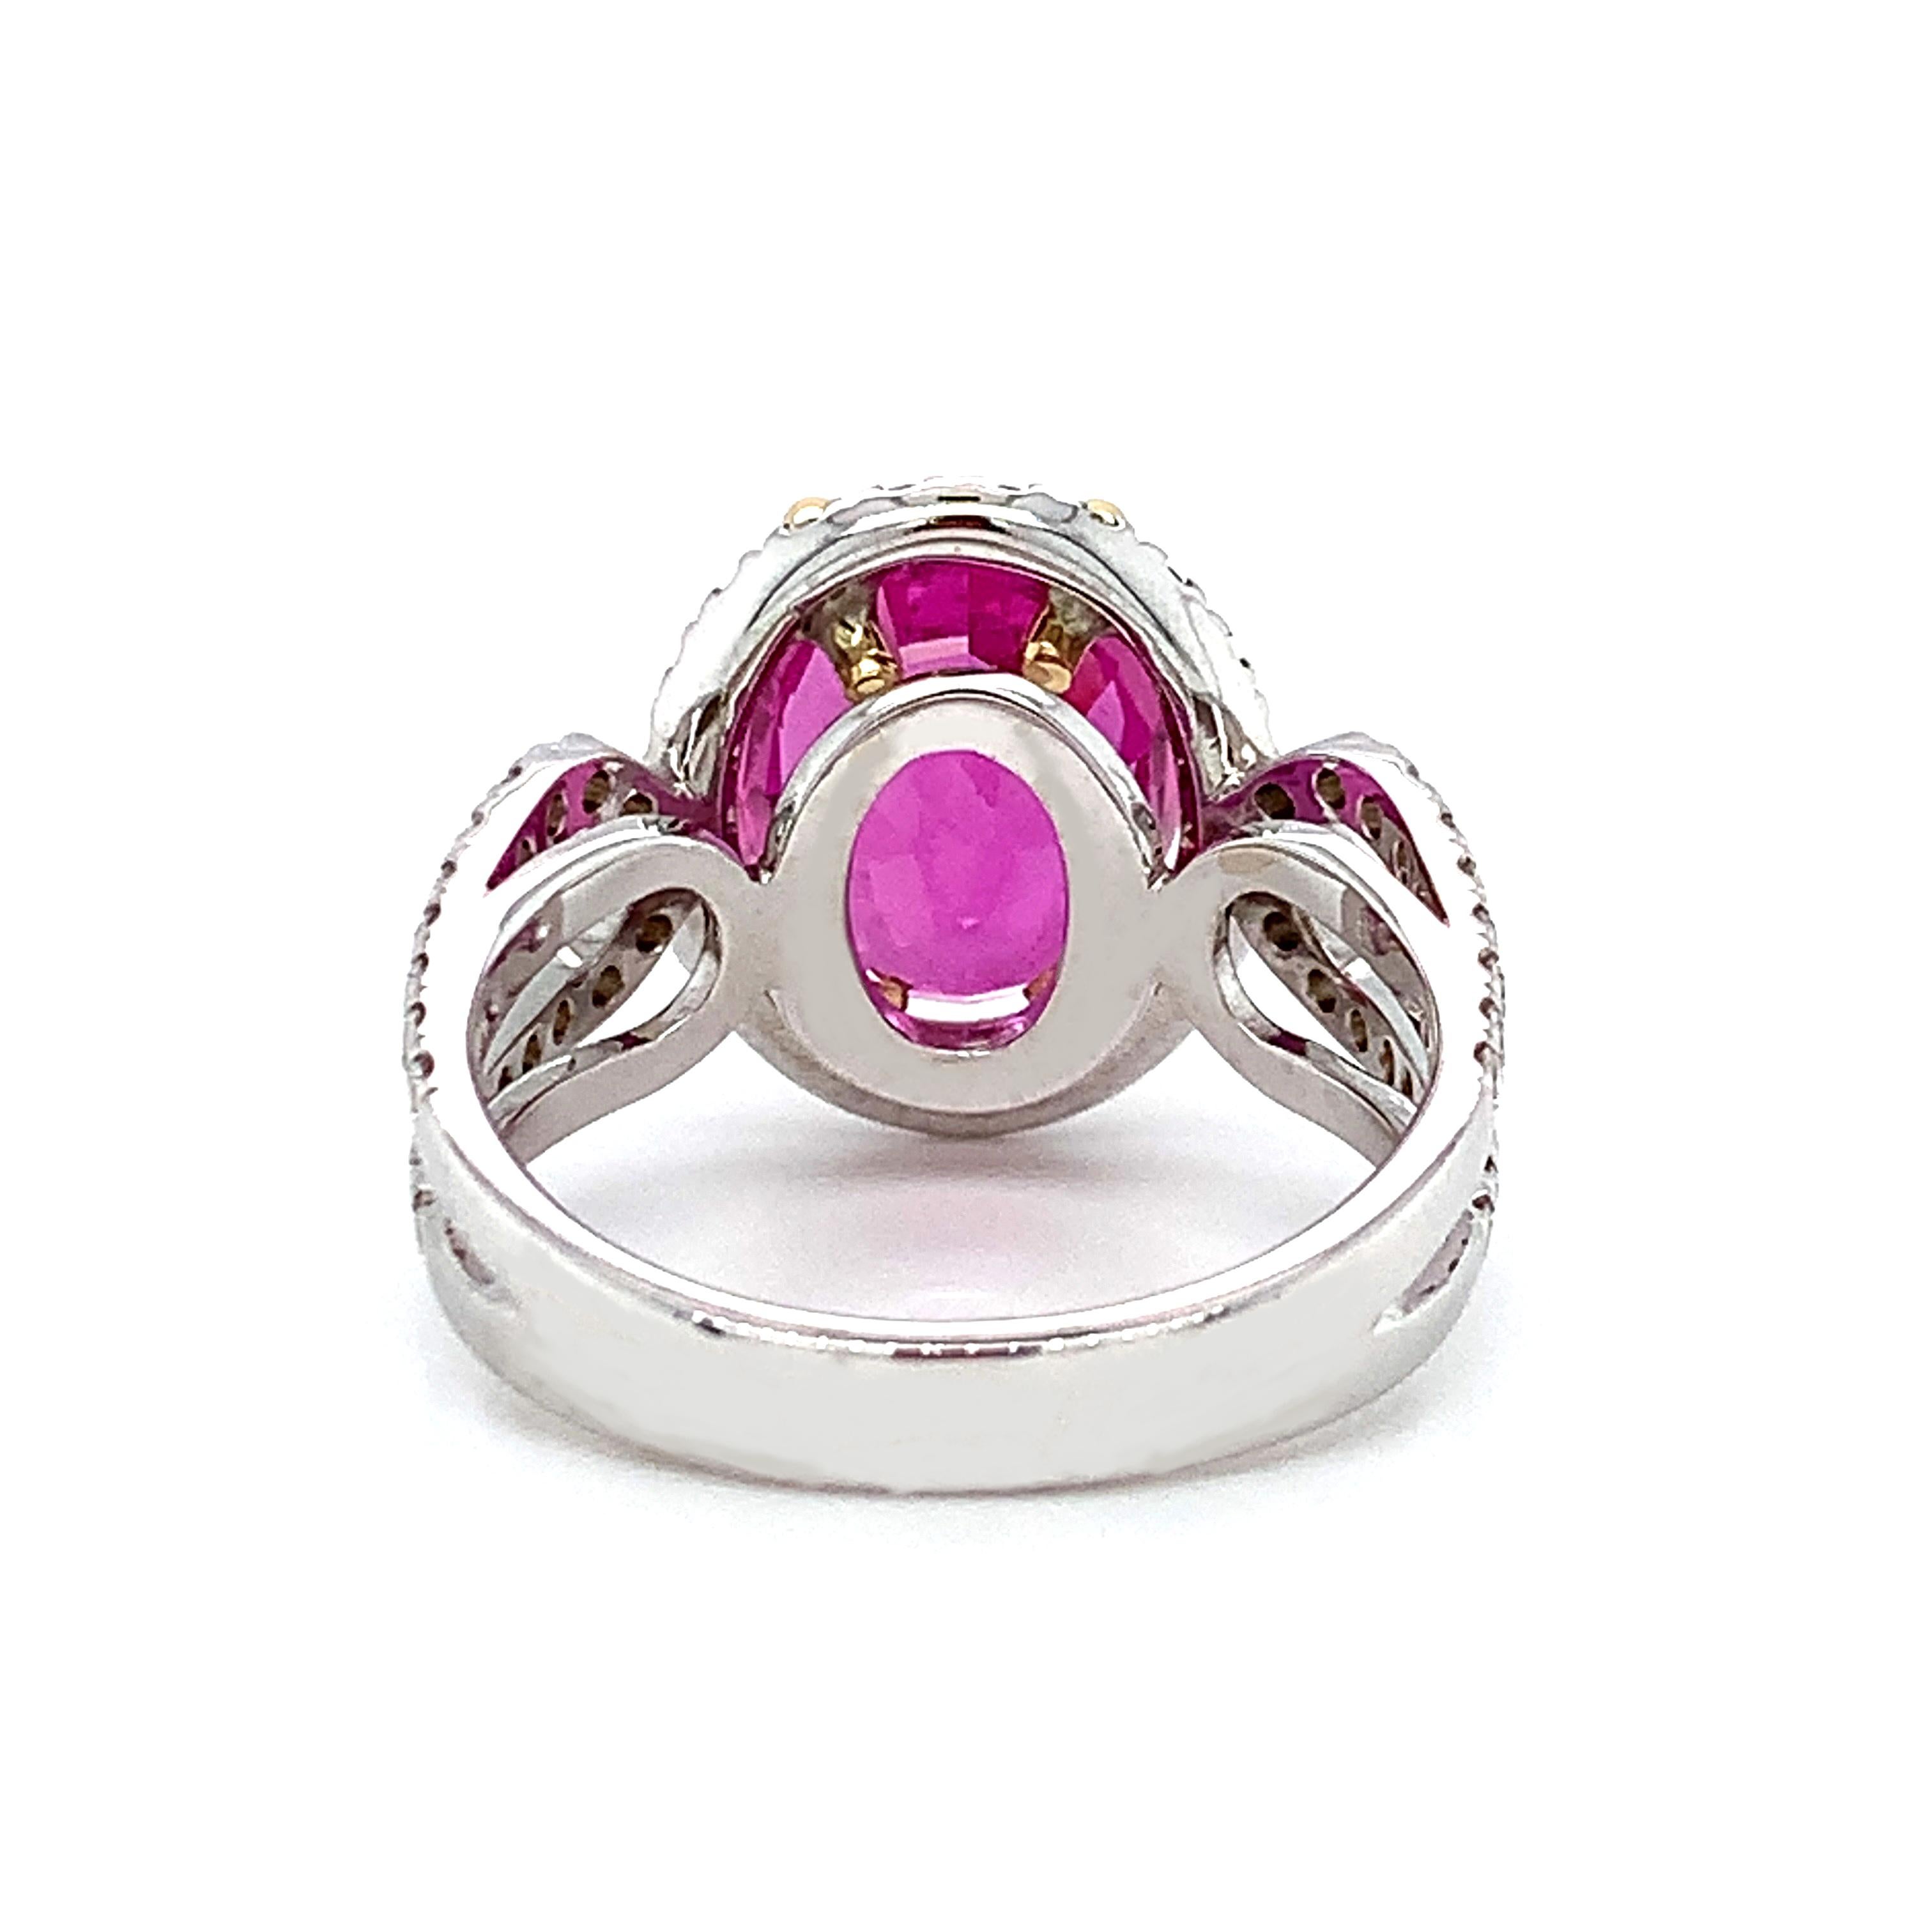 GIA Certified Unheated 5.73 Carat Pink Sapphire and Diamond Cocktail Ring For Sale 4